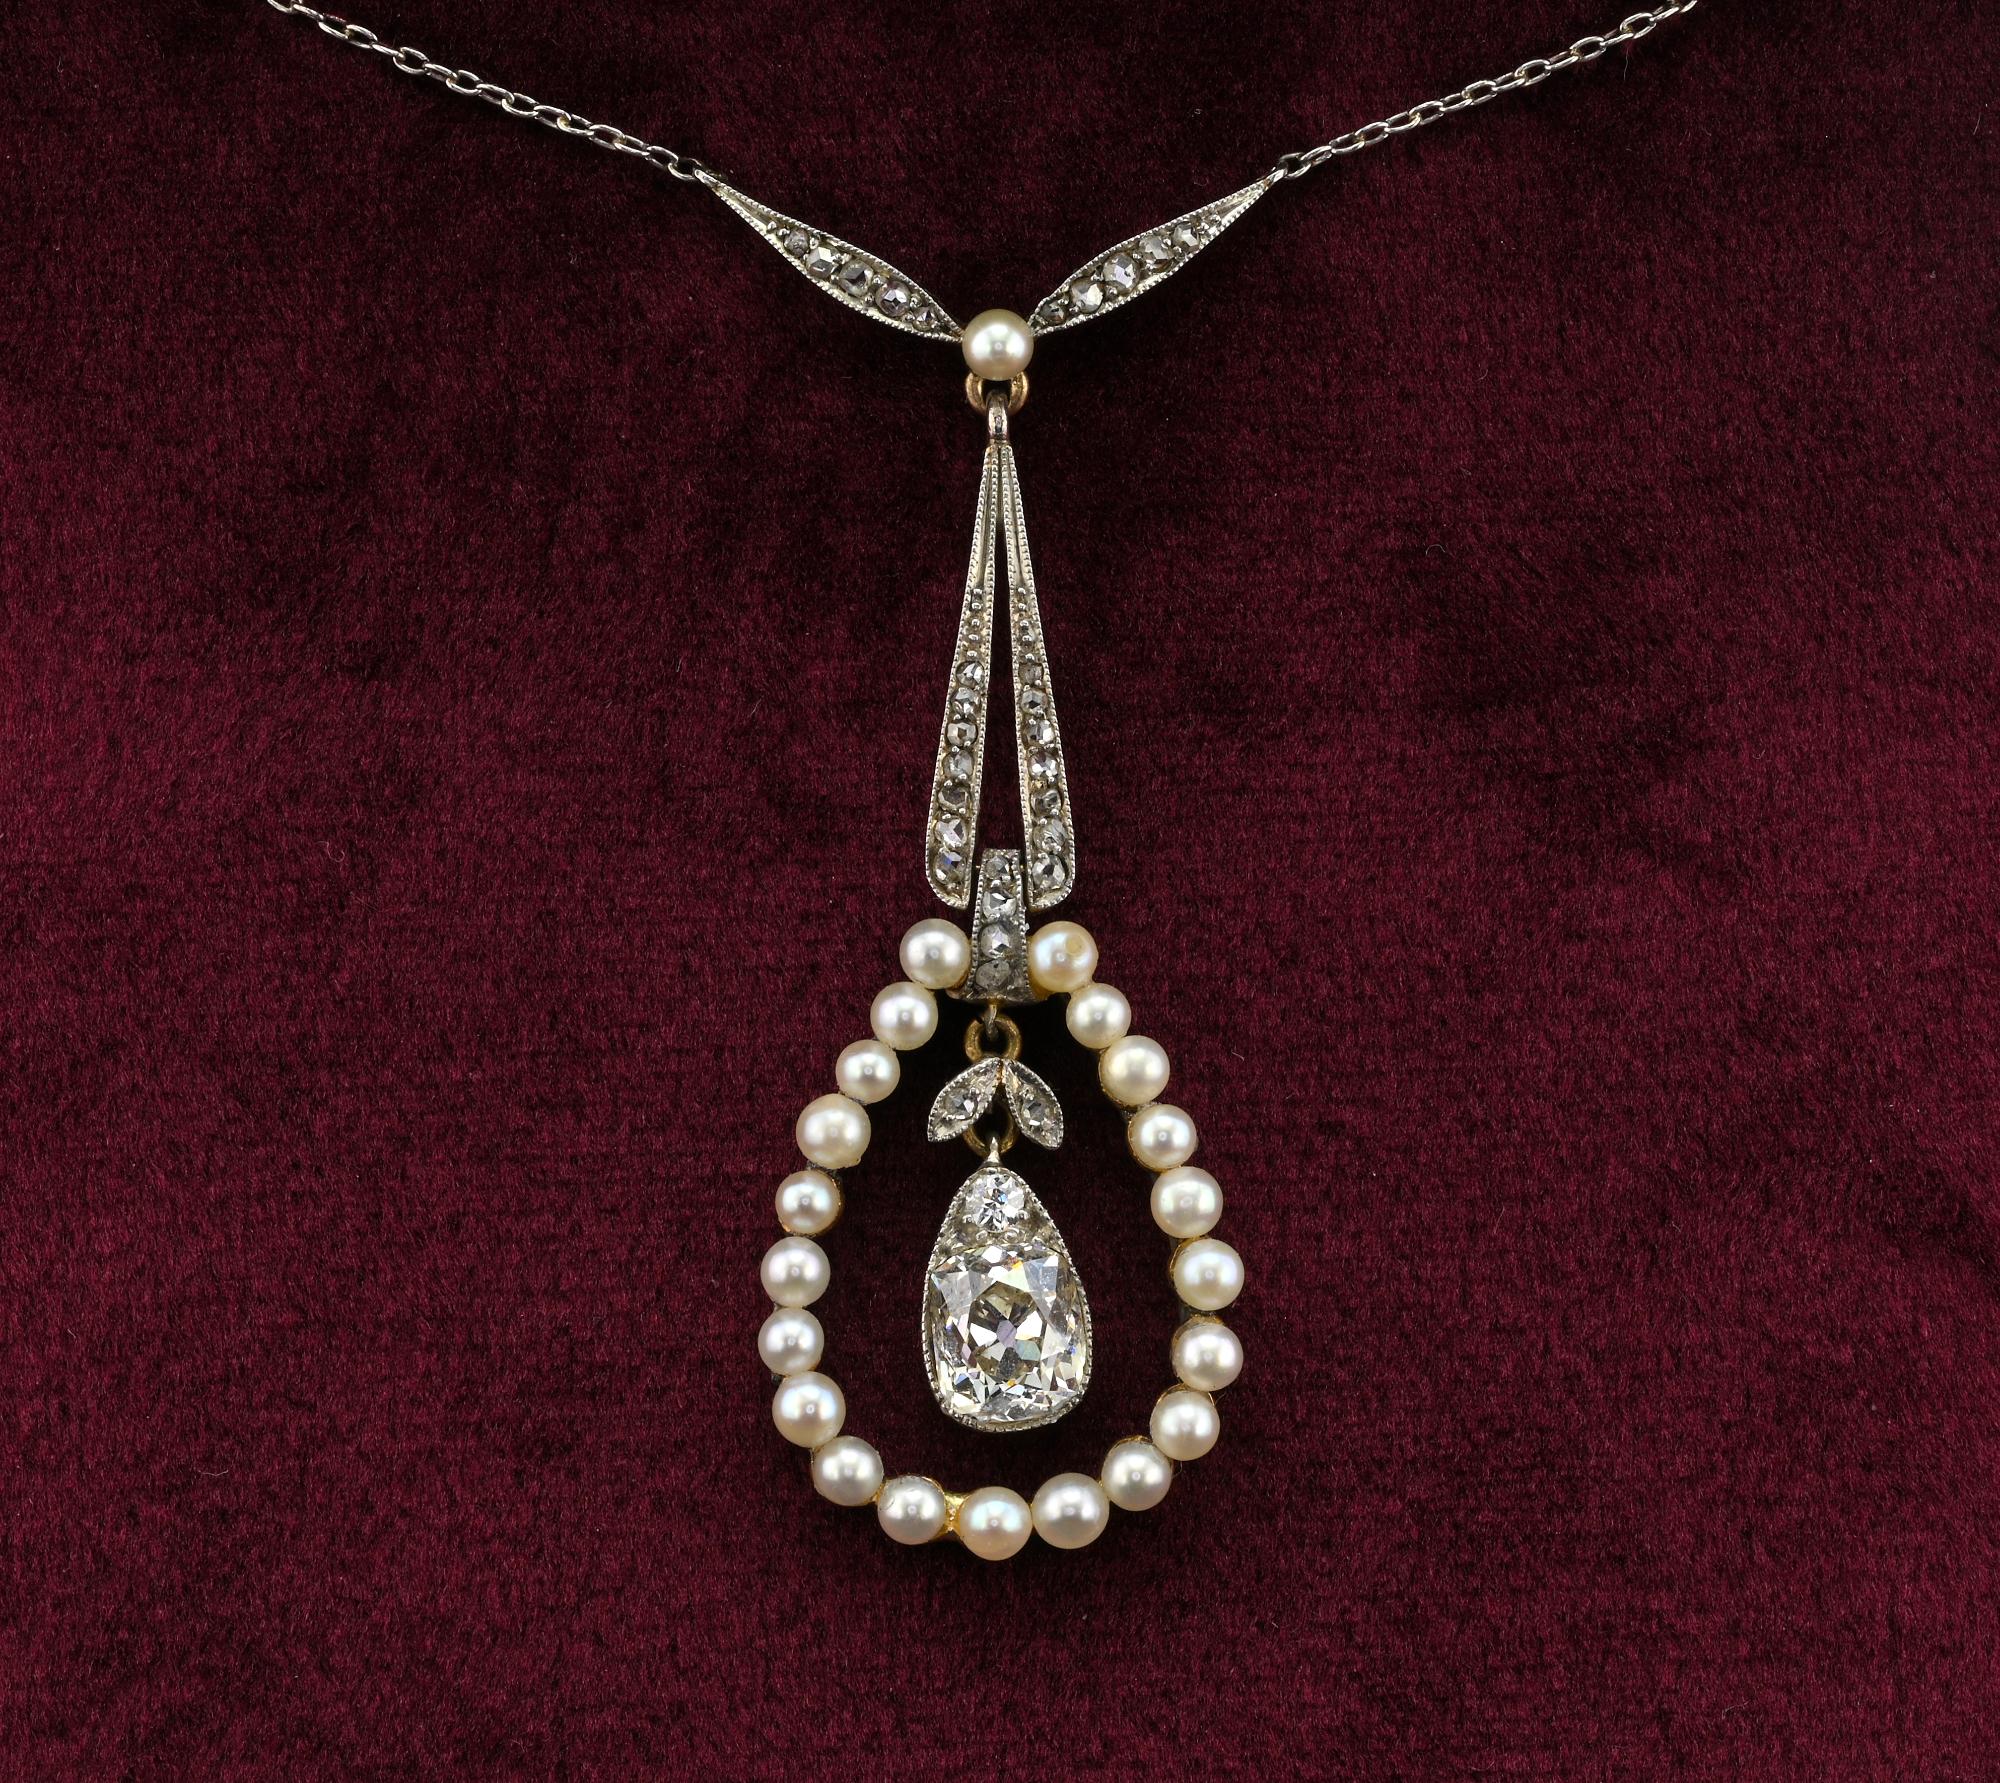 Edwardian period 1900 circa necklace, crafted of Platinum and 18 kt gold
Design is of infinite elegance and grace, hanging from a Platinum chain a pear drop of natural micro pearls, framing a centre Cushion cut Diamond solitaire topped by another